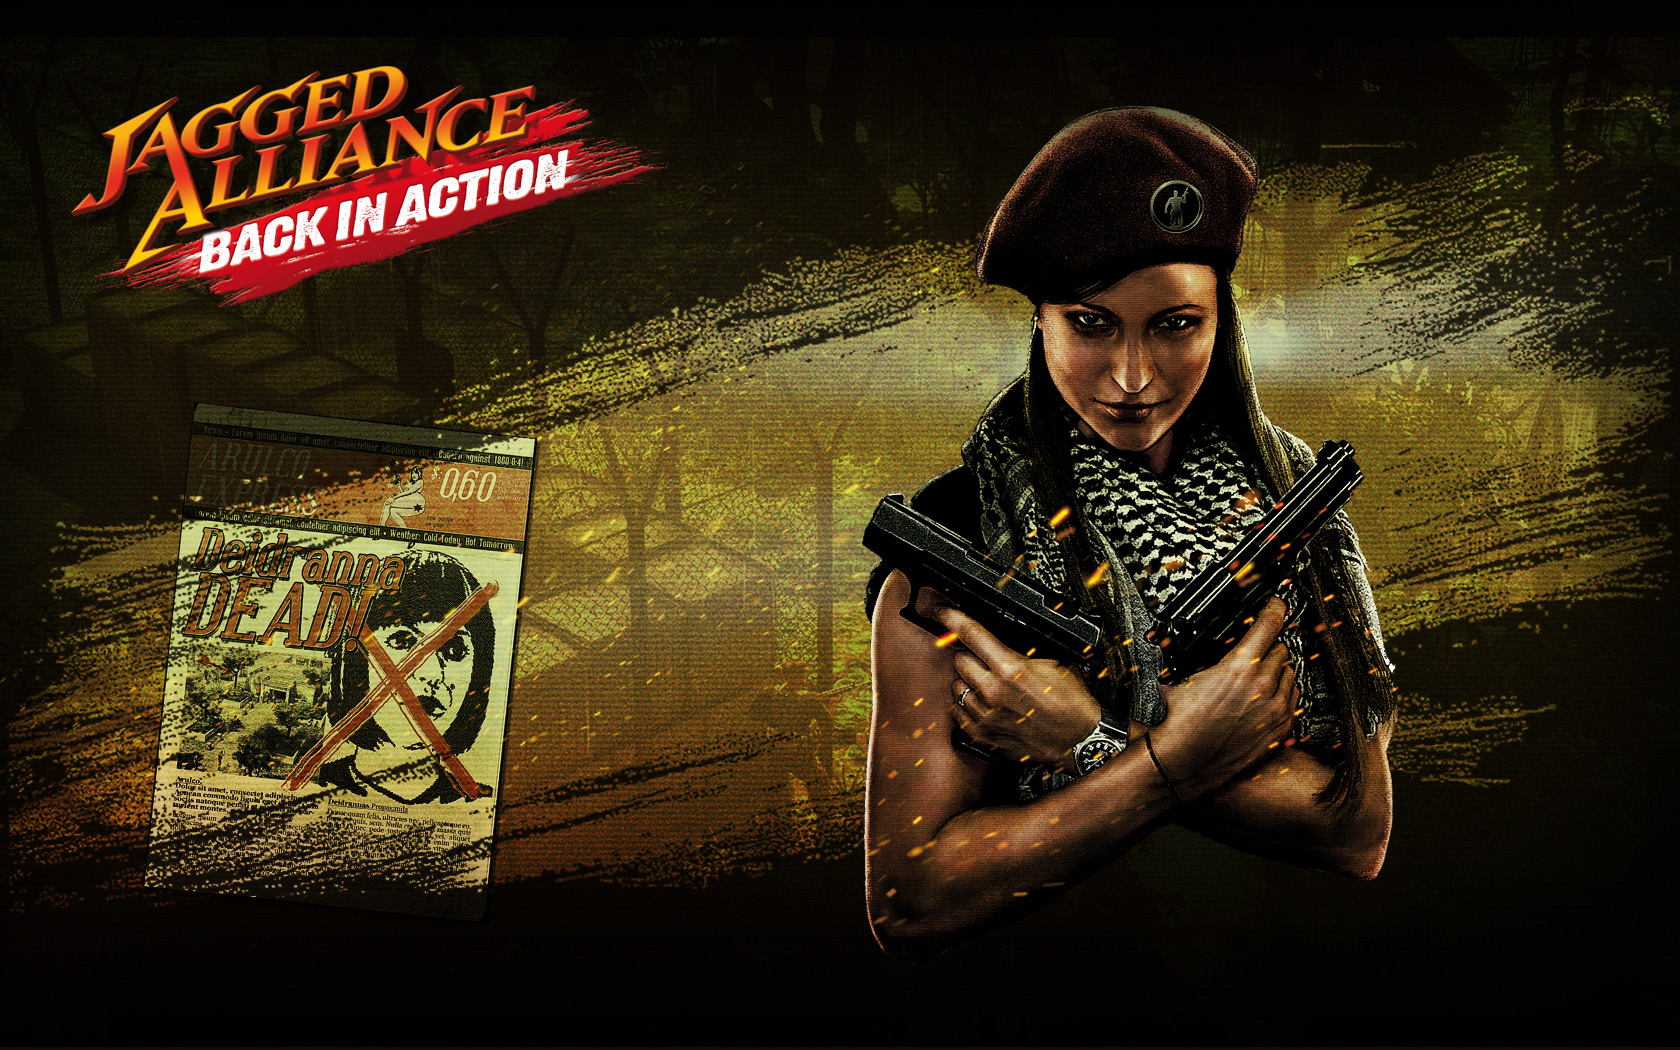 Jagged Alliance Back in Action Wallpaper 01